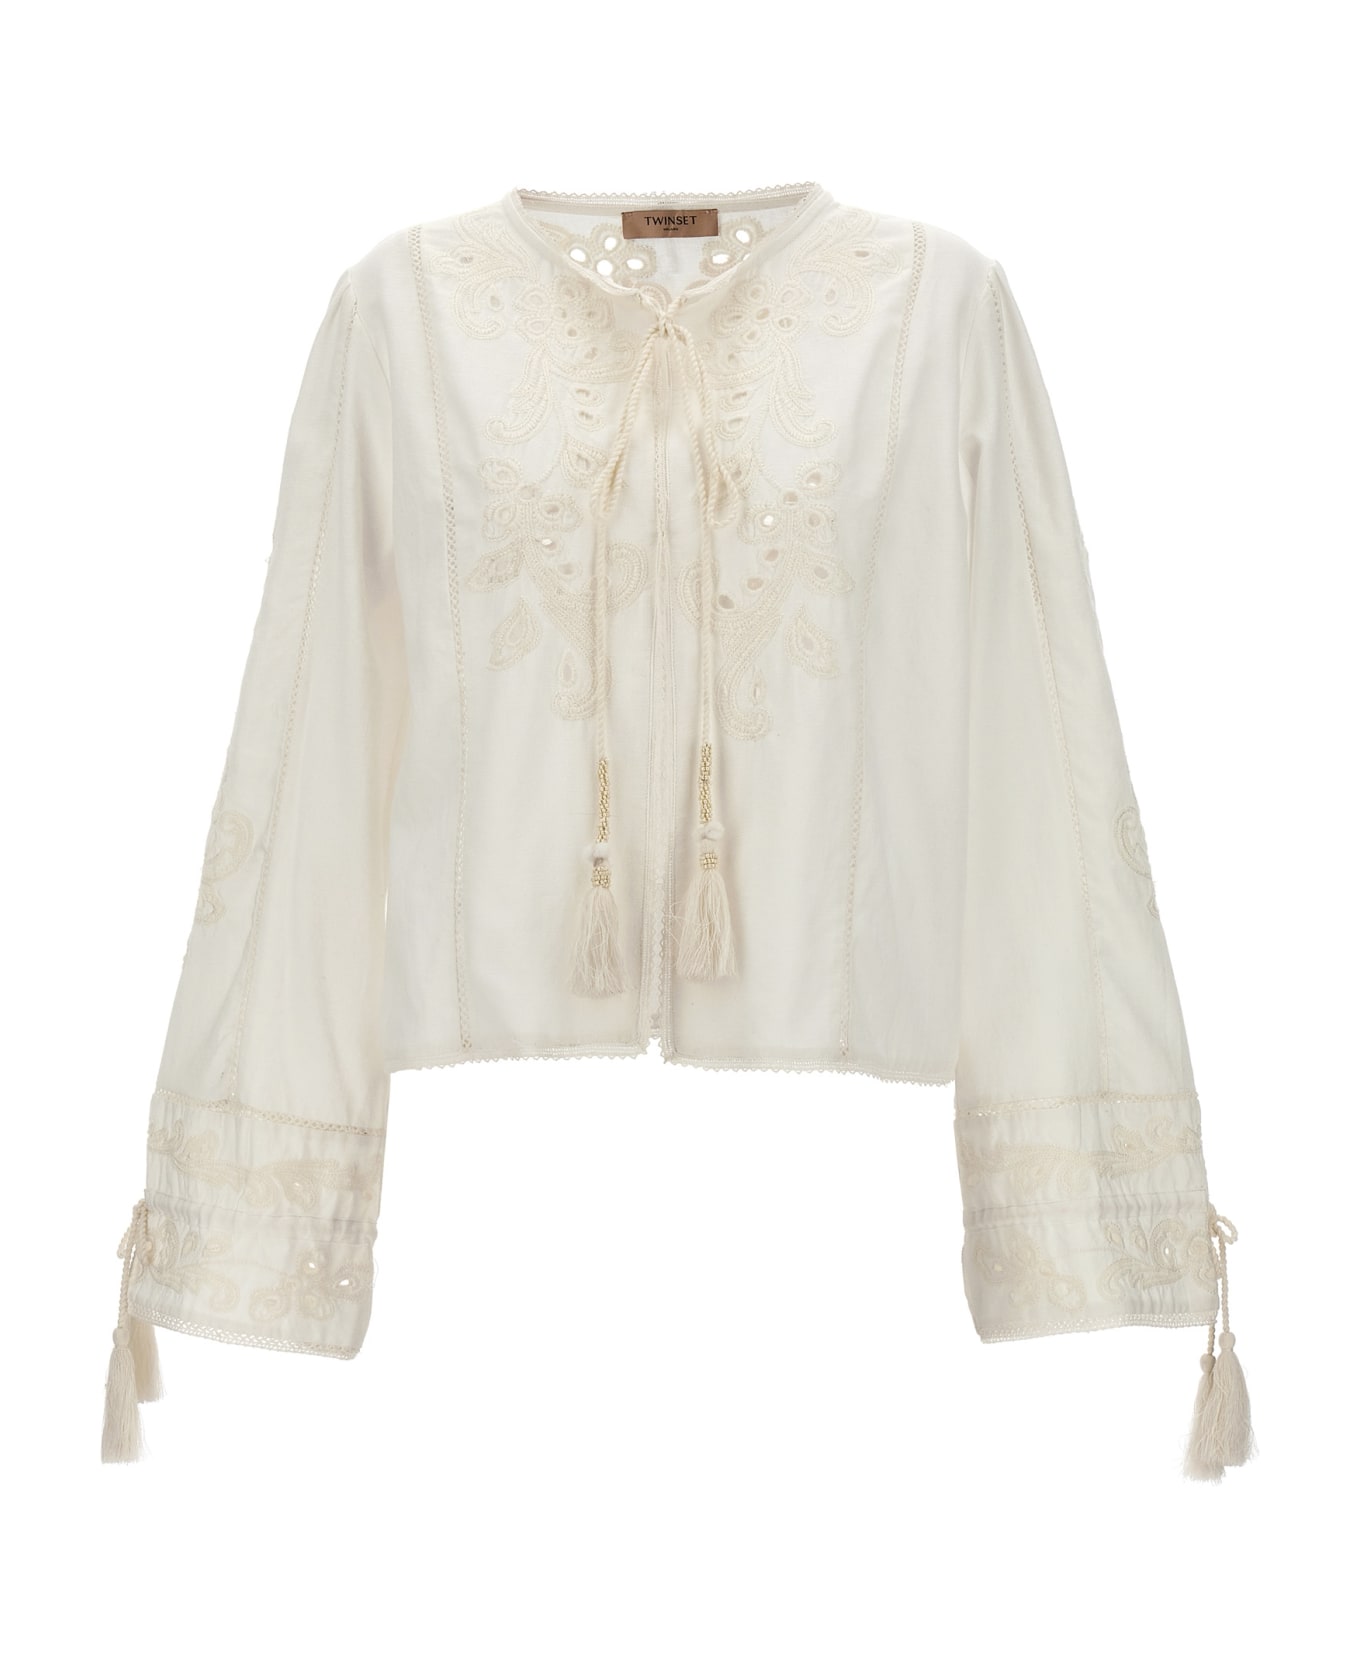 TwinSet Embroidery Blouse - White